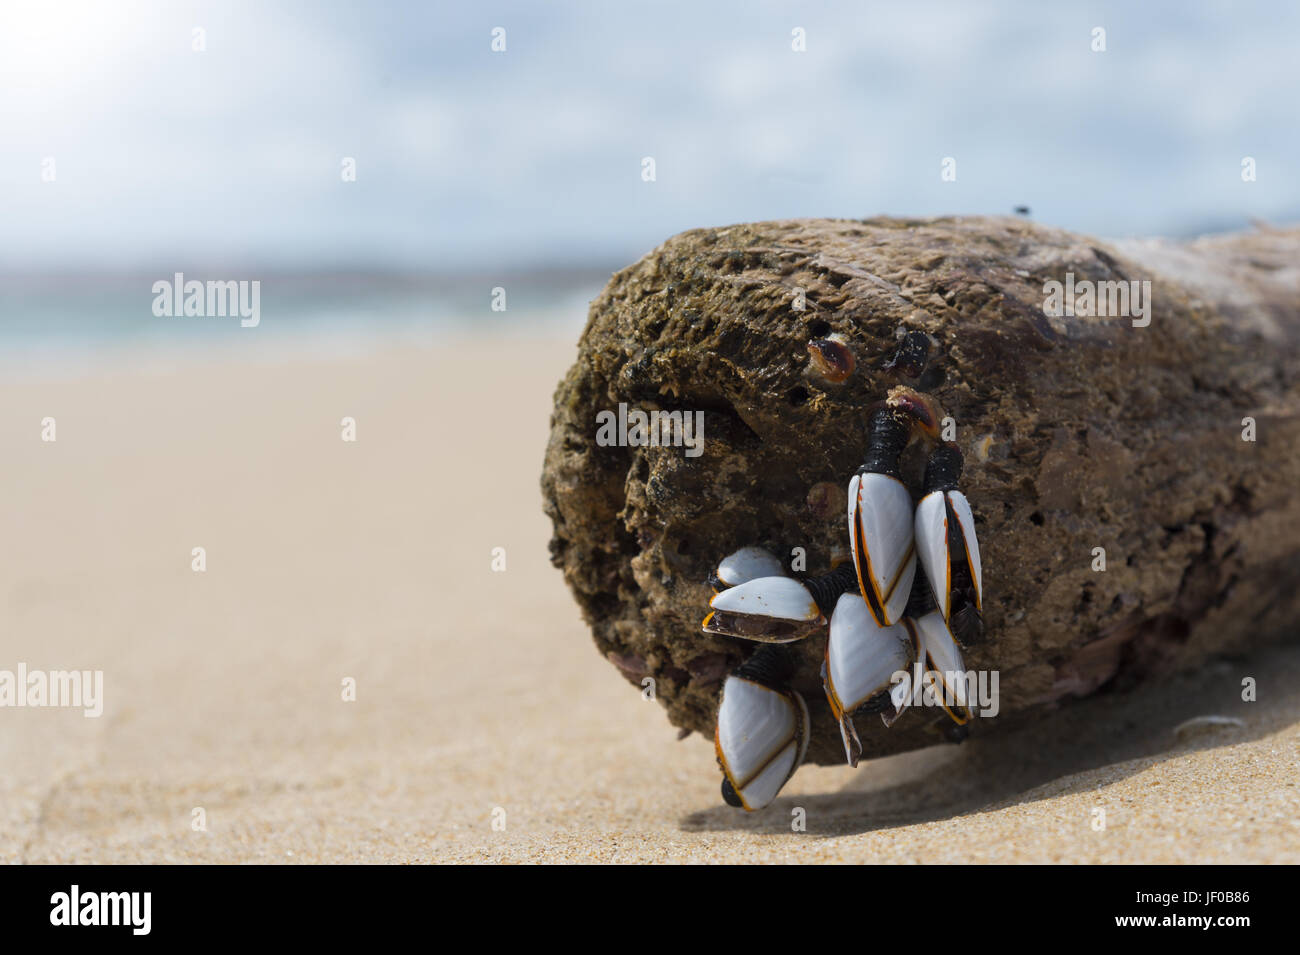 On a wooden post colonizing seashells Stock Photo